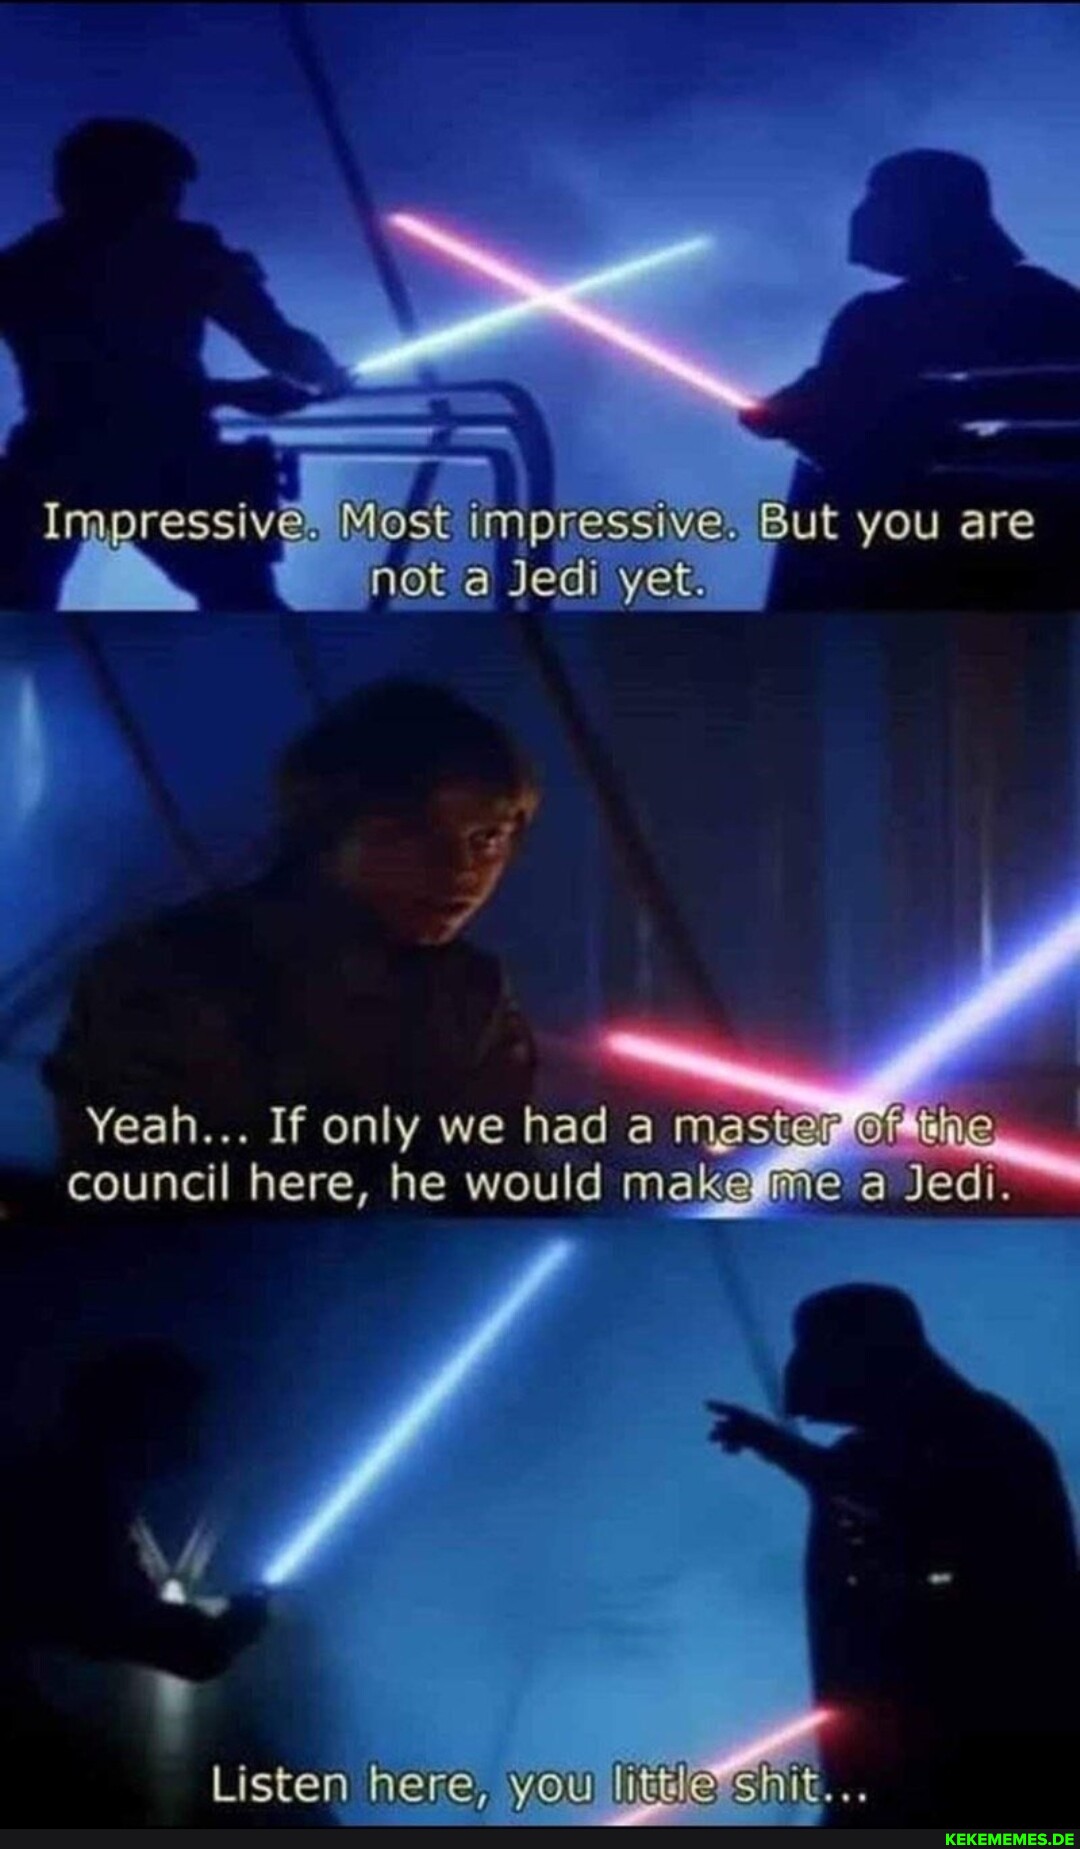 Impressive. impressive. But you are not a Jedi yet. Yeah... If only we had a mas